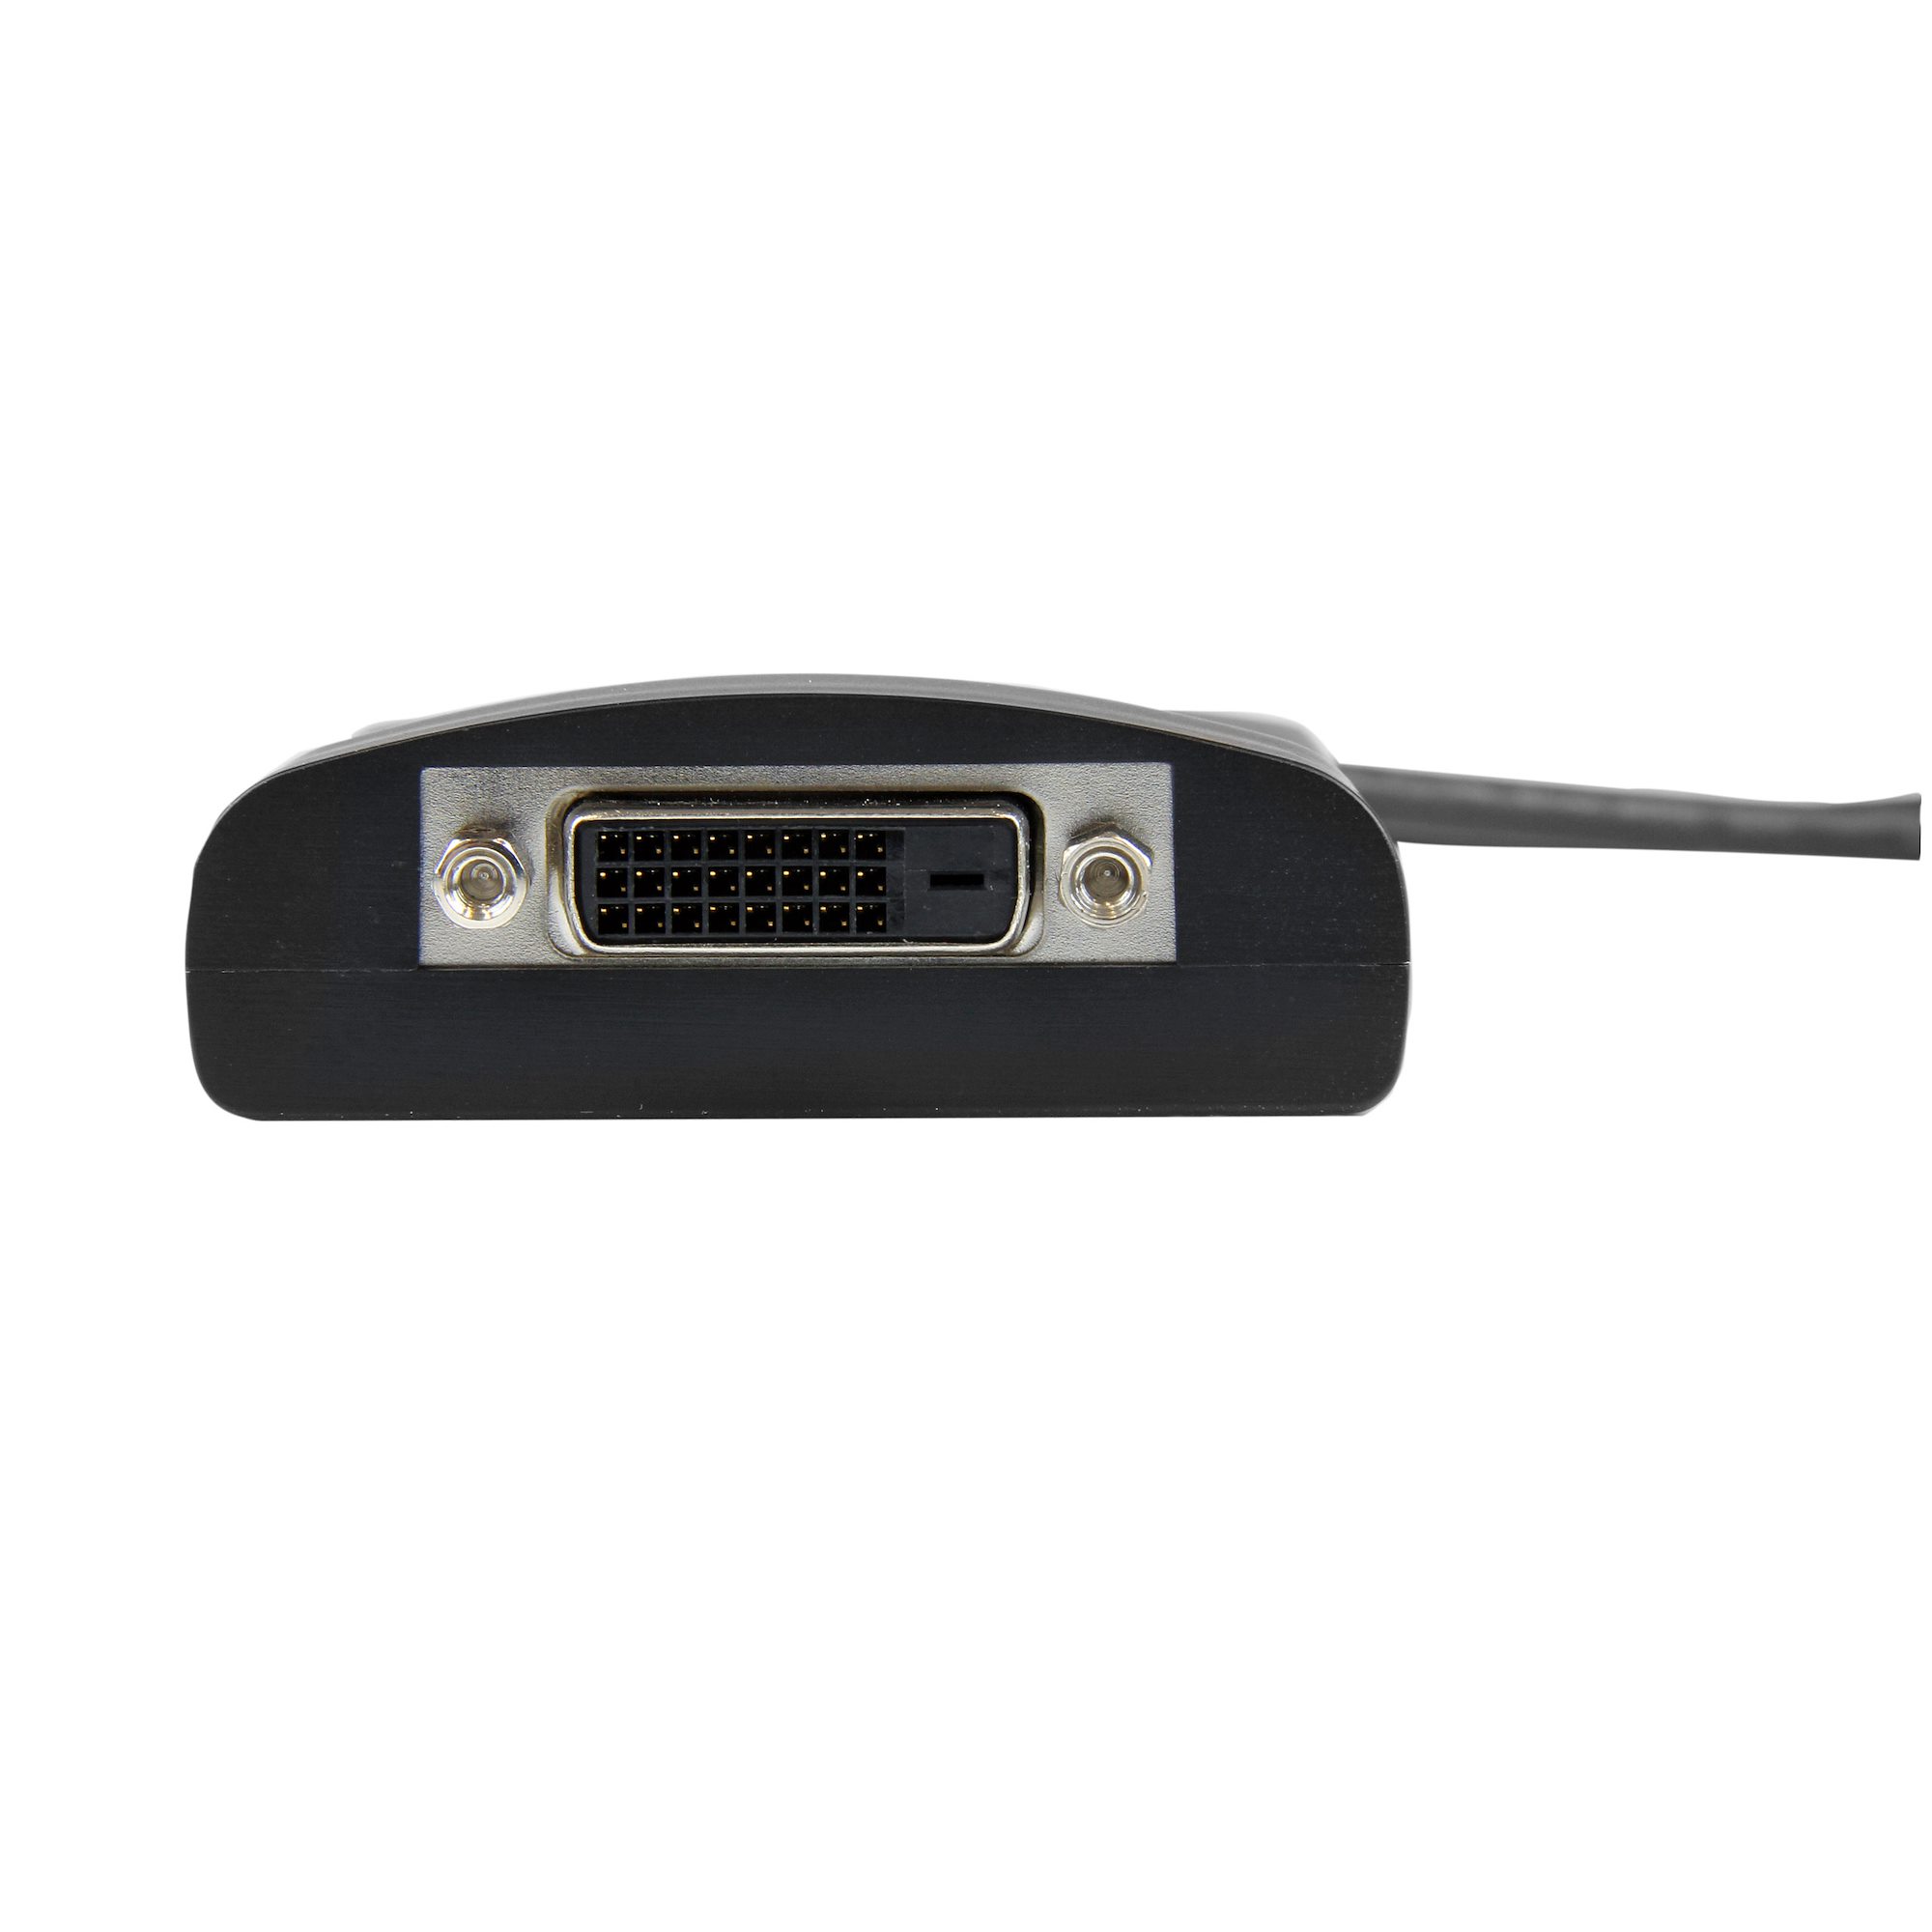 DisplayPort to DVI Dual Link Active Adapter - DisplayPort to DVI-D Adapter  Video Converter 2560x1600 60Hz - DP 1.2 to DVI Monitor - USB Powered -